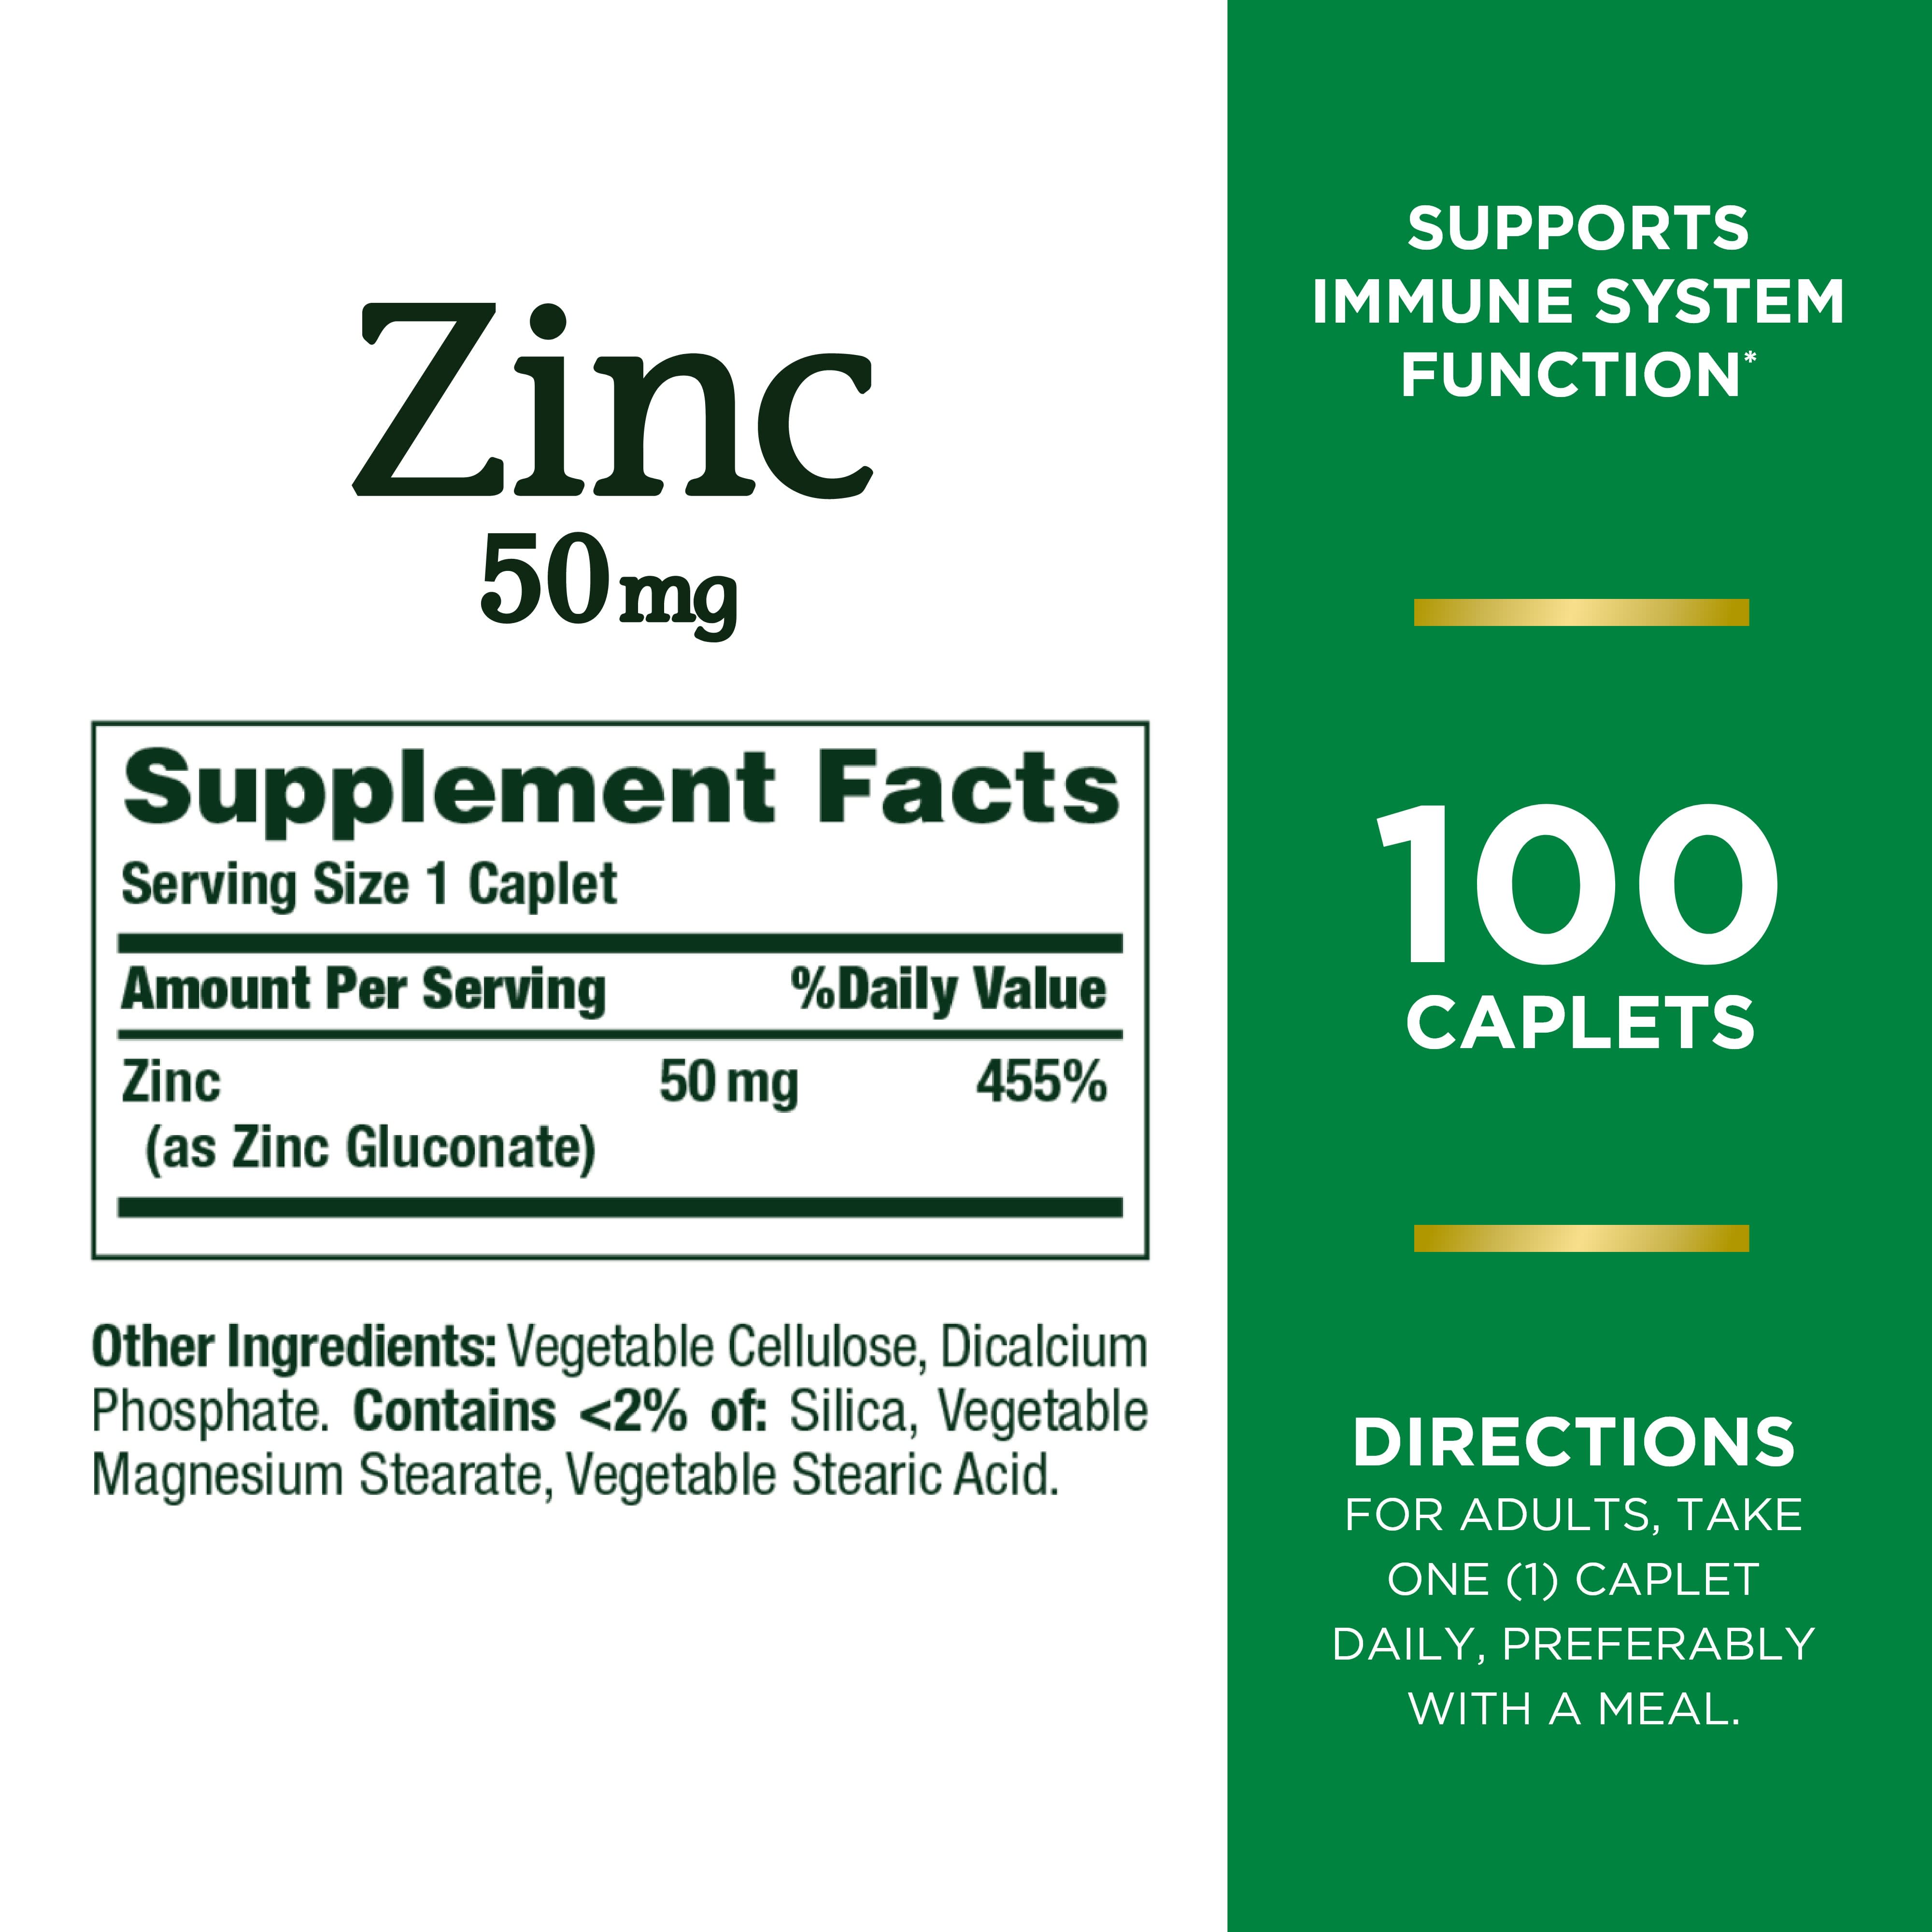 Nature’s Bounty Zinc, Immune Support Supplement, 50 mg, 100 Caplets - image 3 of 11